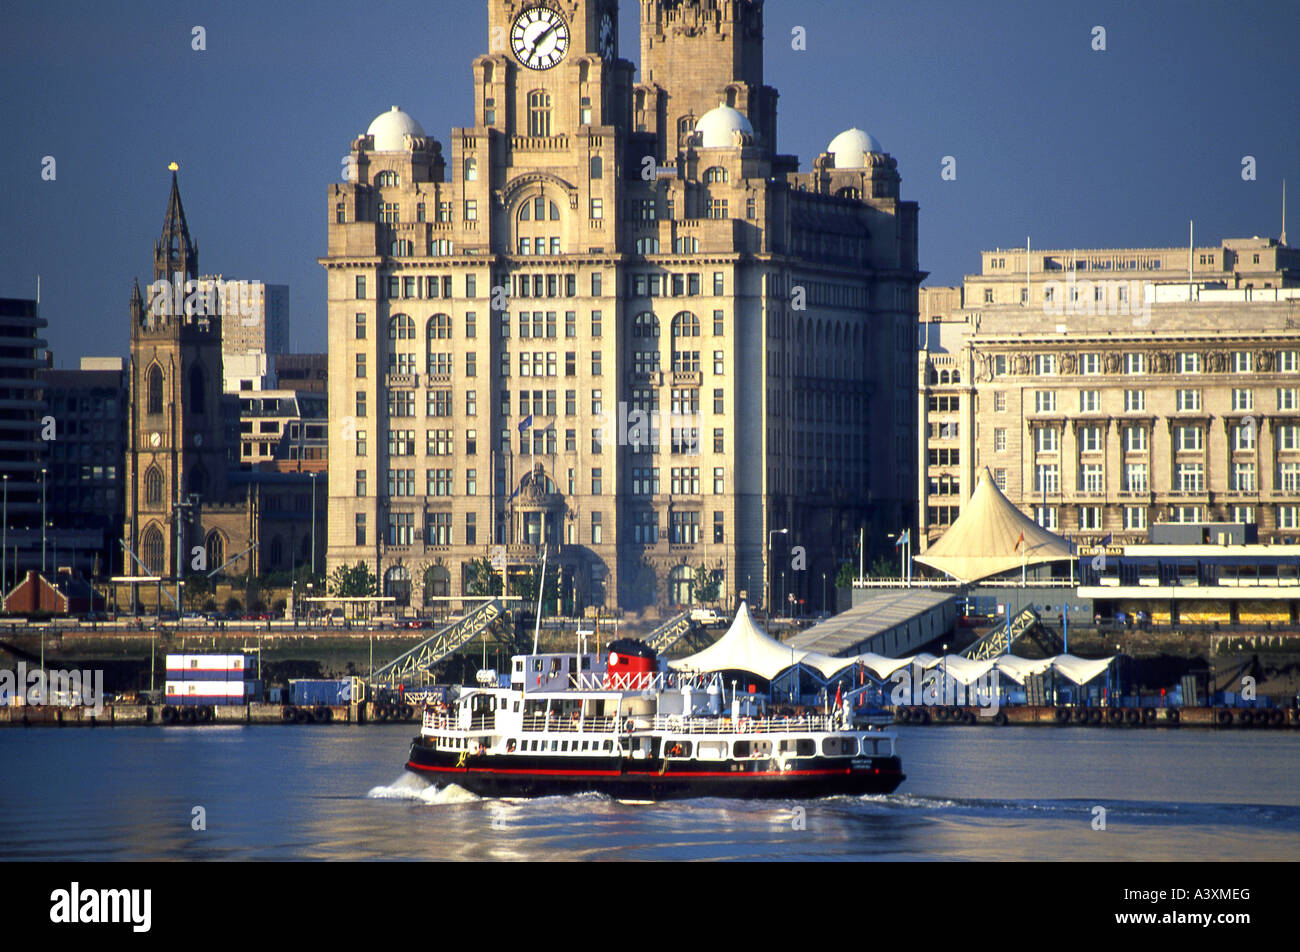 Mersey Ferry Crossing the River Mersey in Front of the Liver Building, Liverpool, Merseyside, England, UK Stock Photo